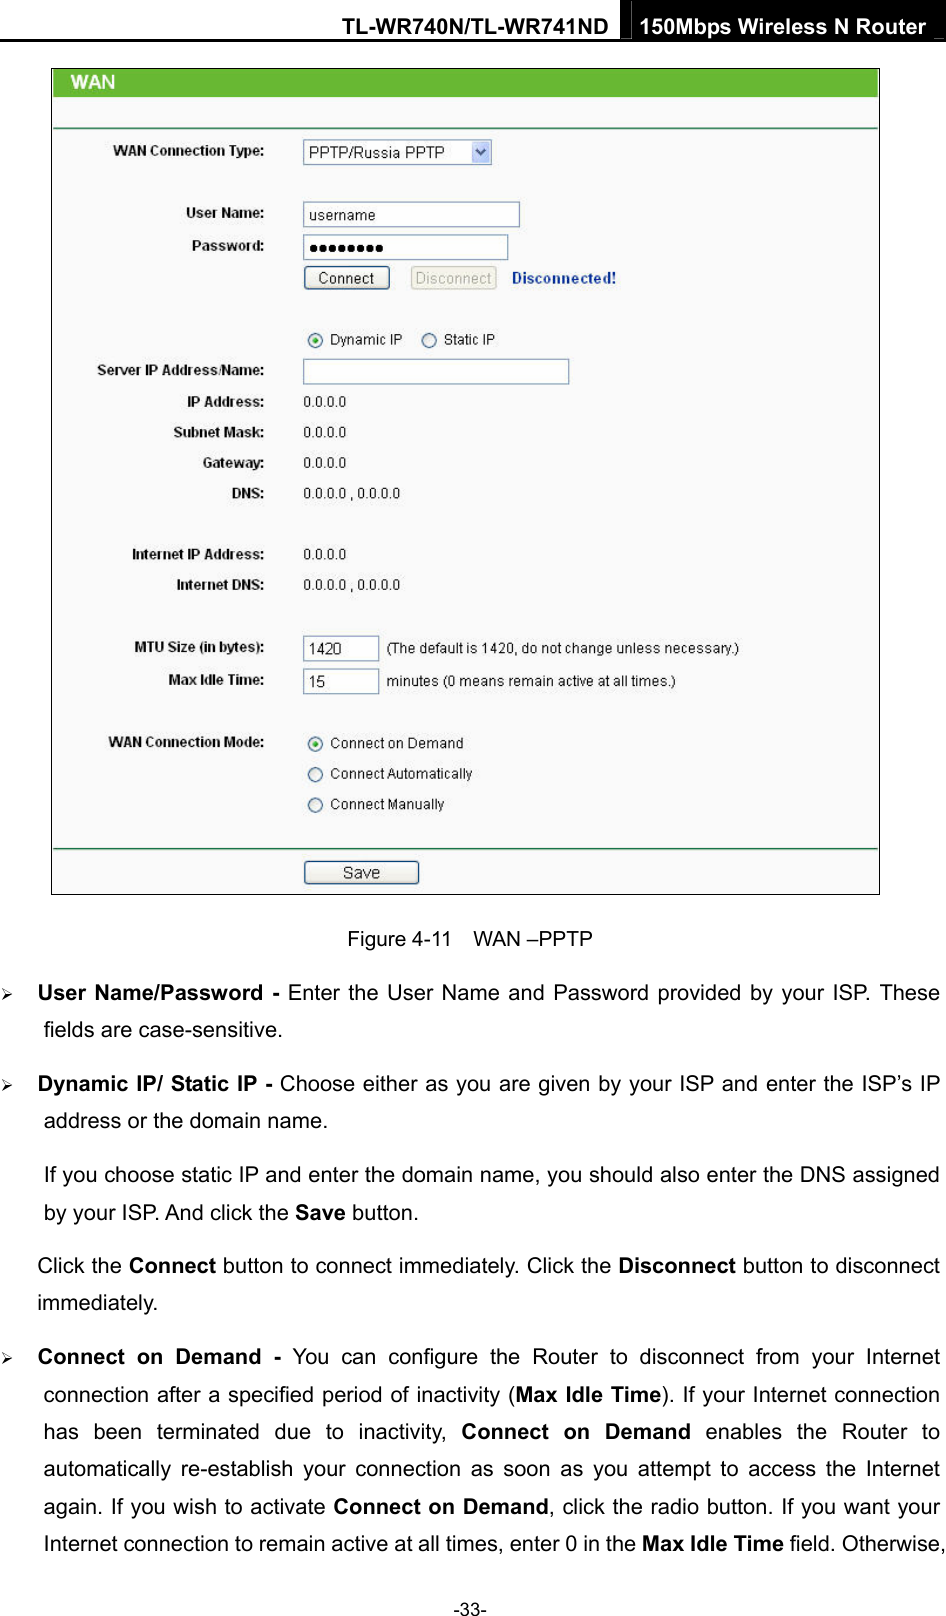 TL-WR740N/TL-WR741ND 150Mbps Wireless N Router  -33-  Figure 4-11  WAN –PPTP ¾ User Name/Password - Enter the User Name and Password provided by your ISP. These fields are case-sensitive. ¾ Dynamic IP/ Static IP - Choose either as you are given by your ISP and enter the ISP’s IP address or the domain name. If you choose static IP and enter the domain name, you should also enter the DNS assigned by your ISP. And click the Save button. Click the Connect button to connect immediately. Click the Disconnect button to disconnect immediately. ¾ Connect on Demand - You can configure the Router to disconnect from your Internet connection after a specified period of inactivity (Max Idle Time). If your Internet connection has been terminated due to inactivity, Connect on Demand enables the Router to automatically re-establish your connection as soon as you attempt to access the Internet again. If you wish to activate Connect on Demand, click the radio button. If you want your Internet connection to remain active at all times, enter 0 in the Max Idle Time field. Otherwise, 